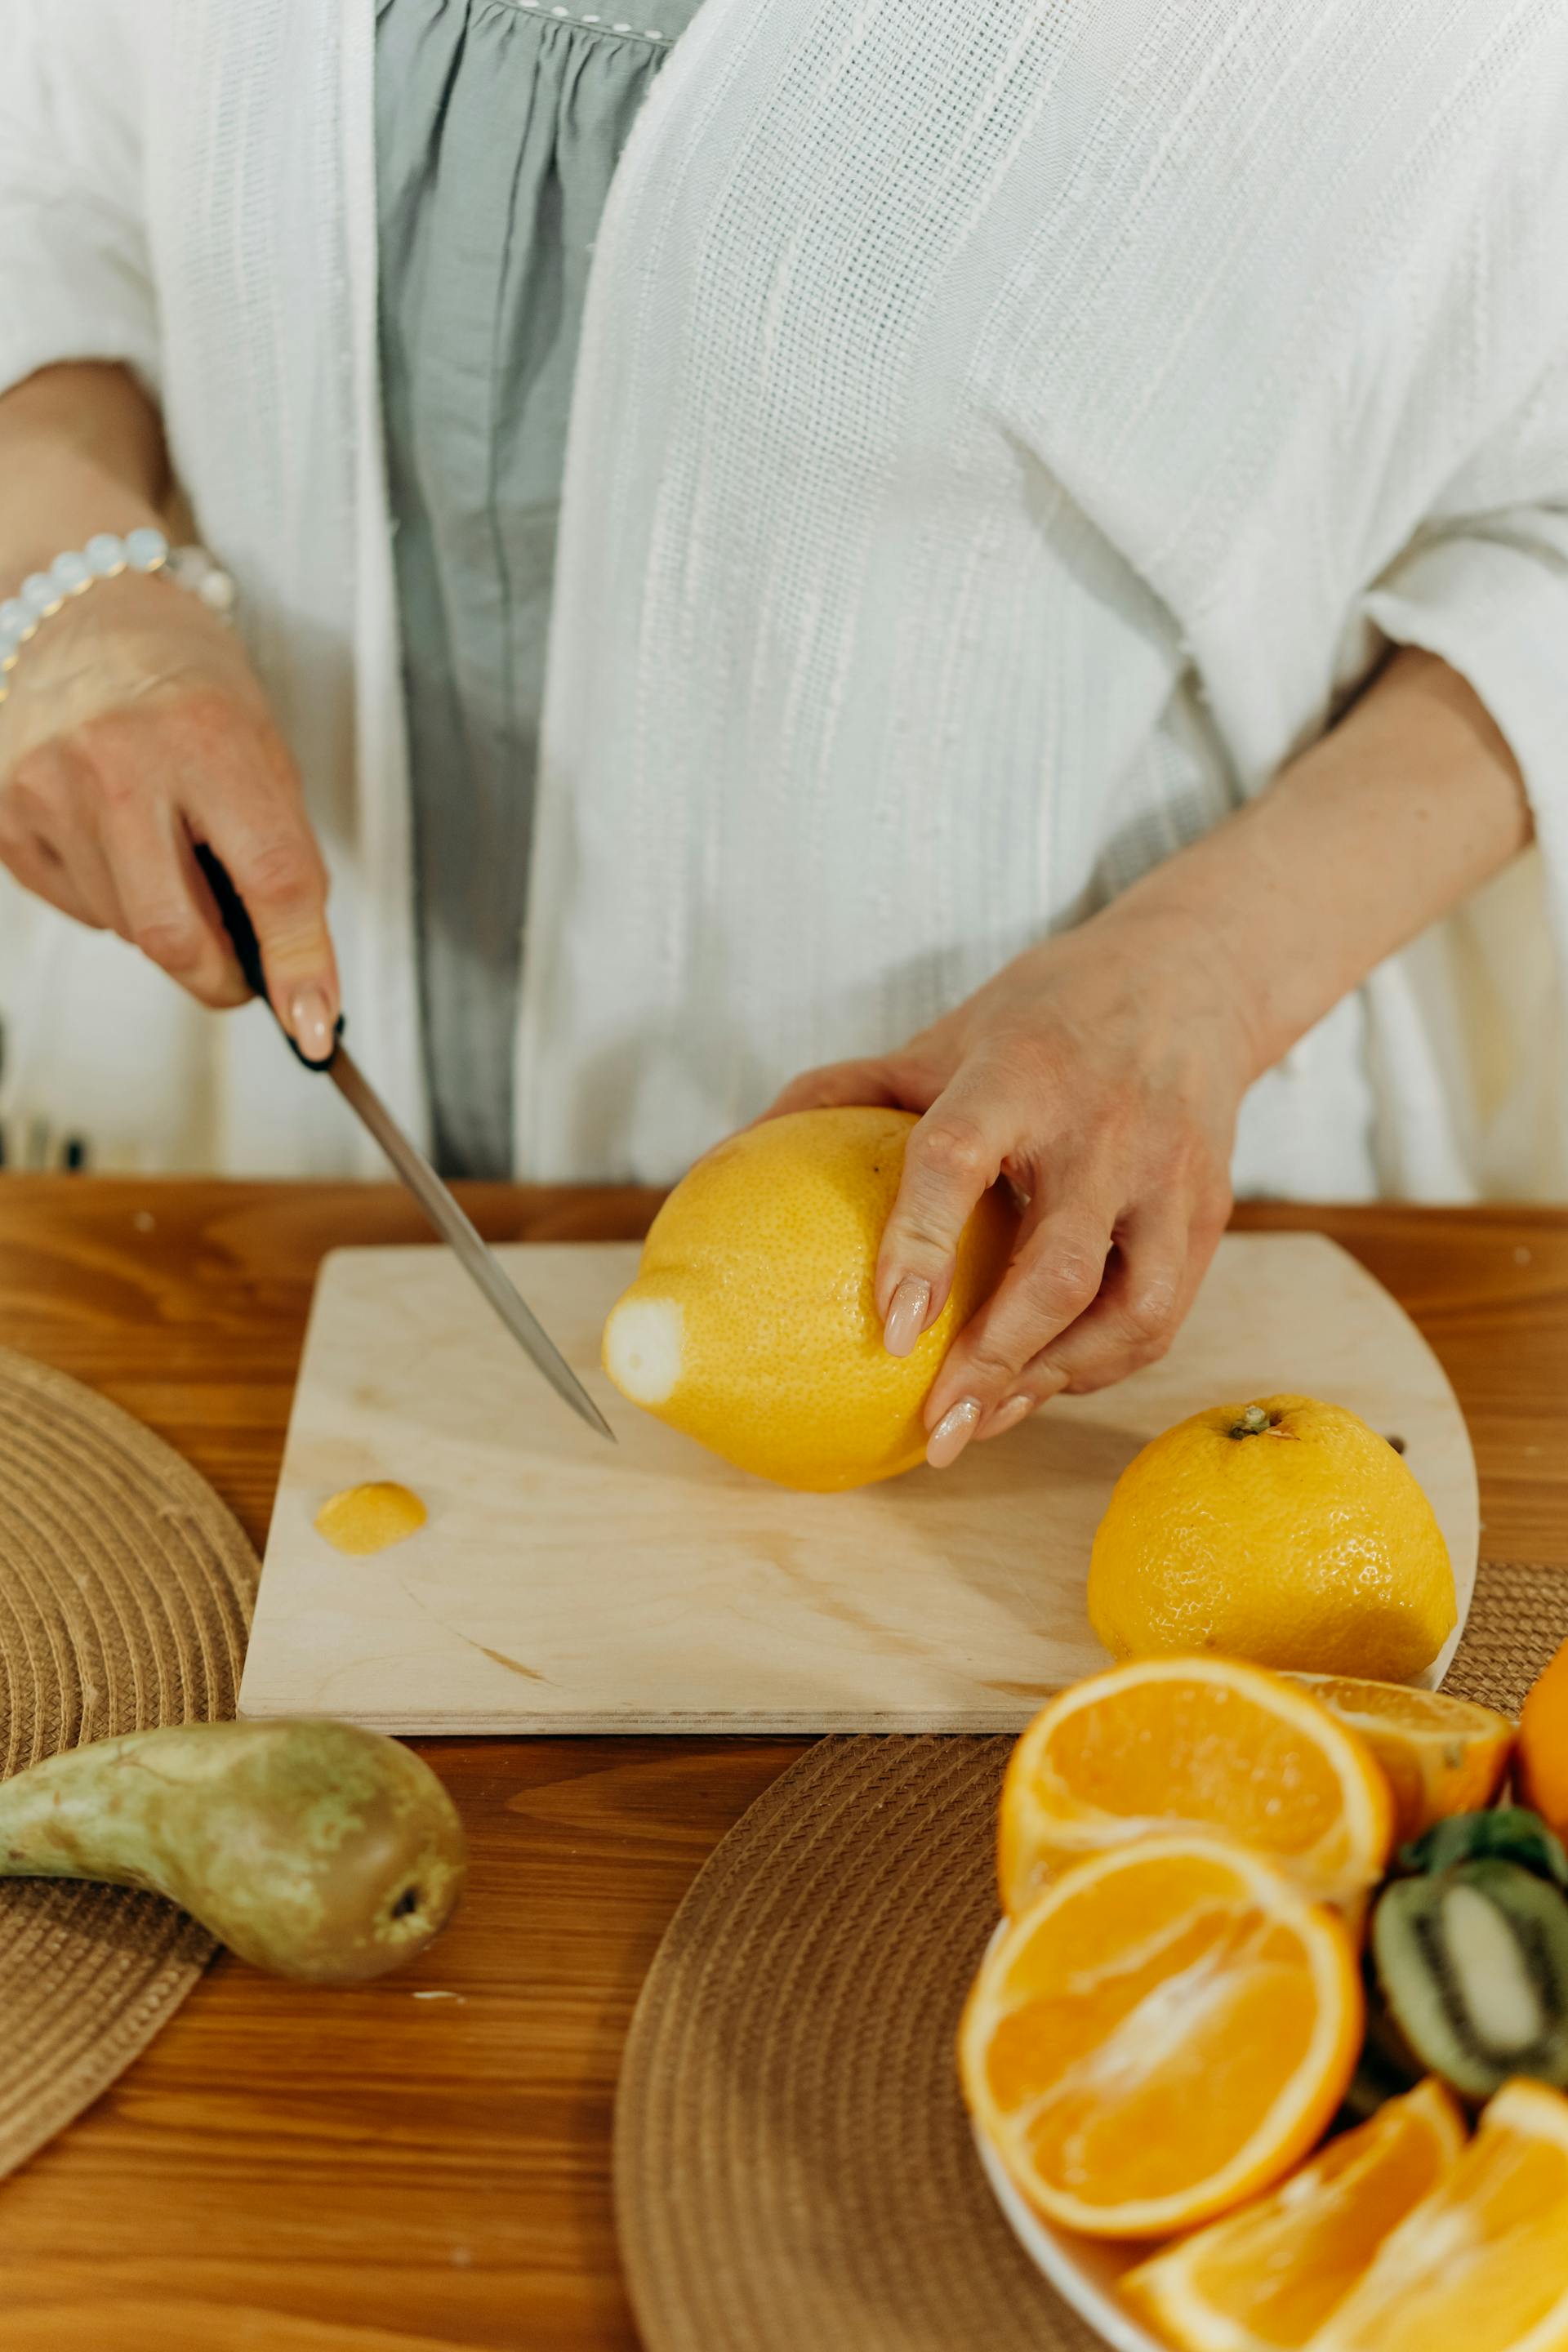 A person cutting oranges | Source: Pexels